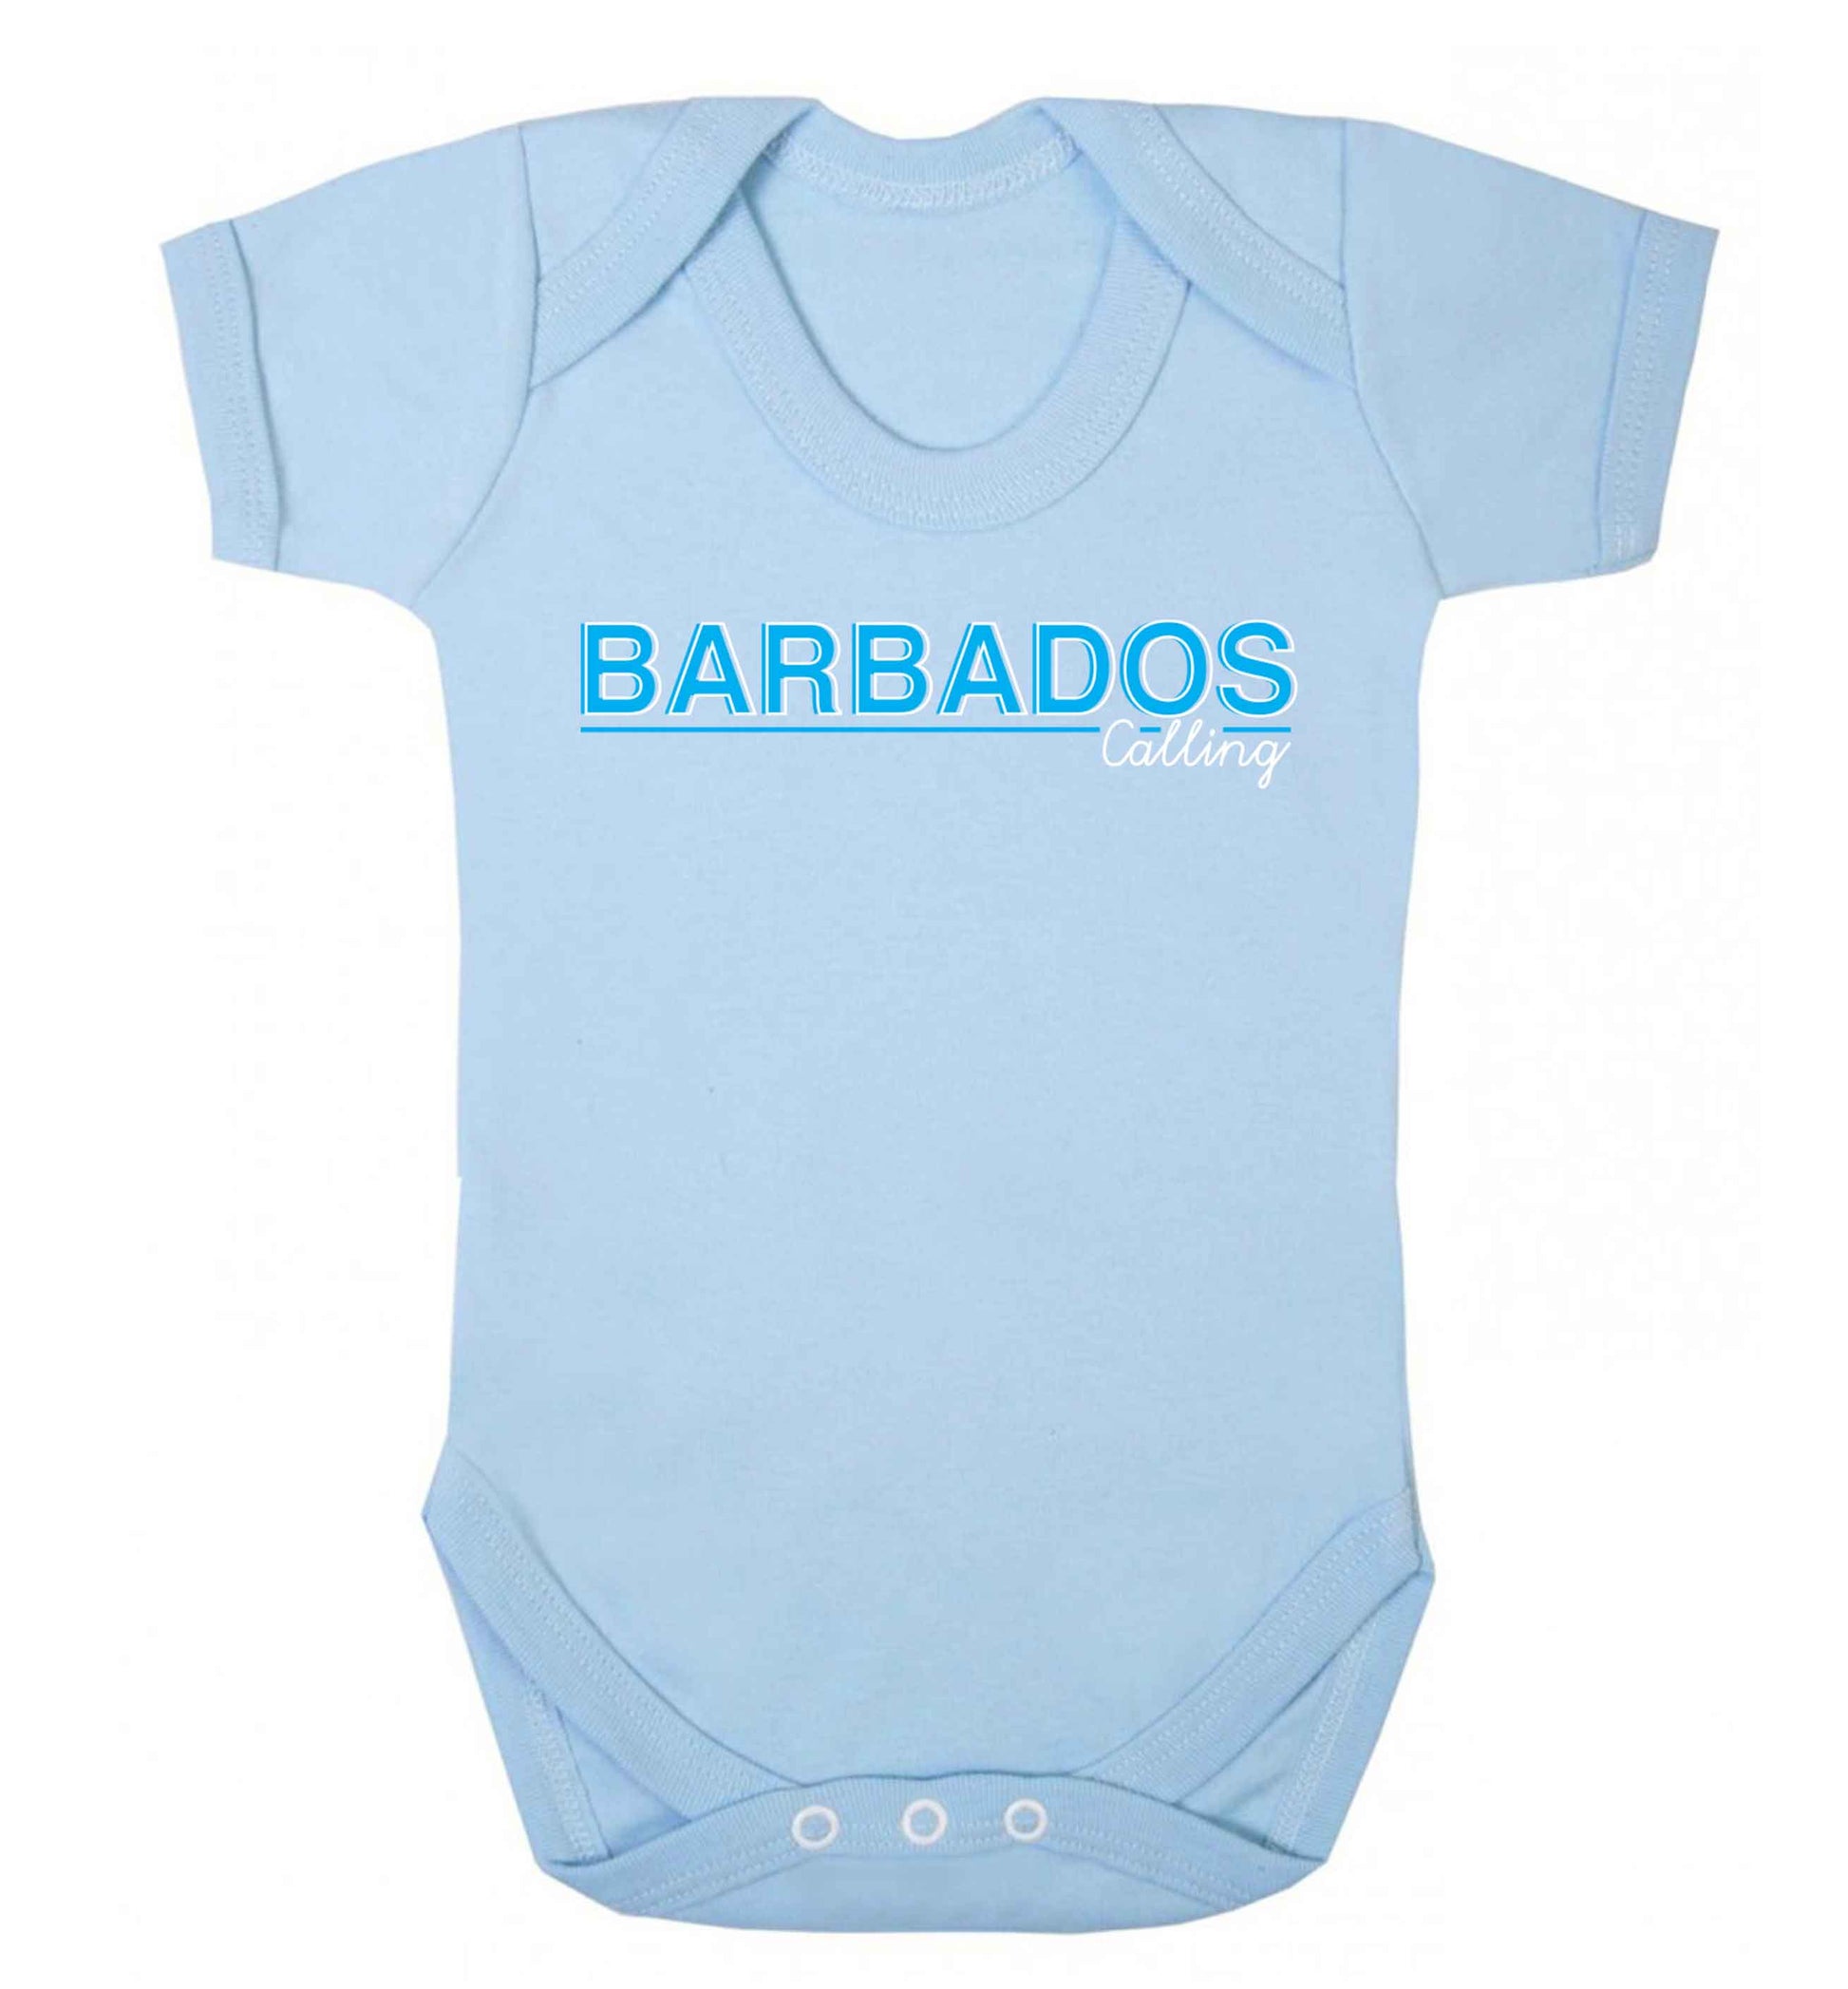 Barbados calling Baby Vest pale blue 18-24 months